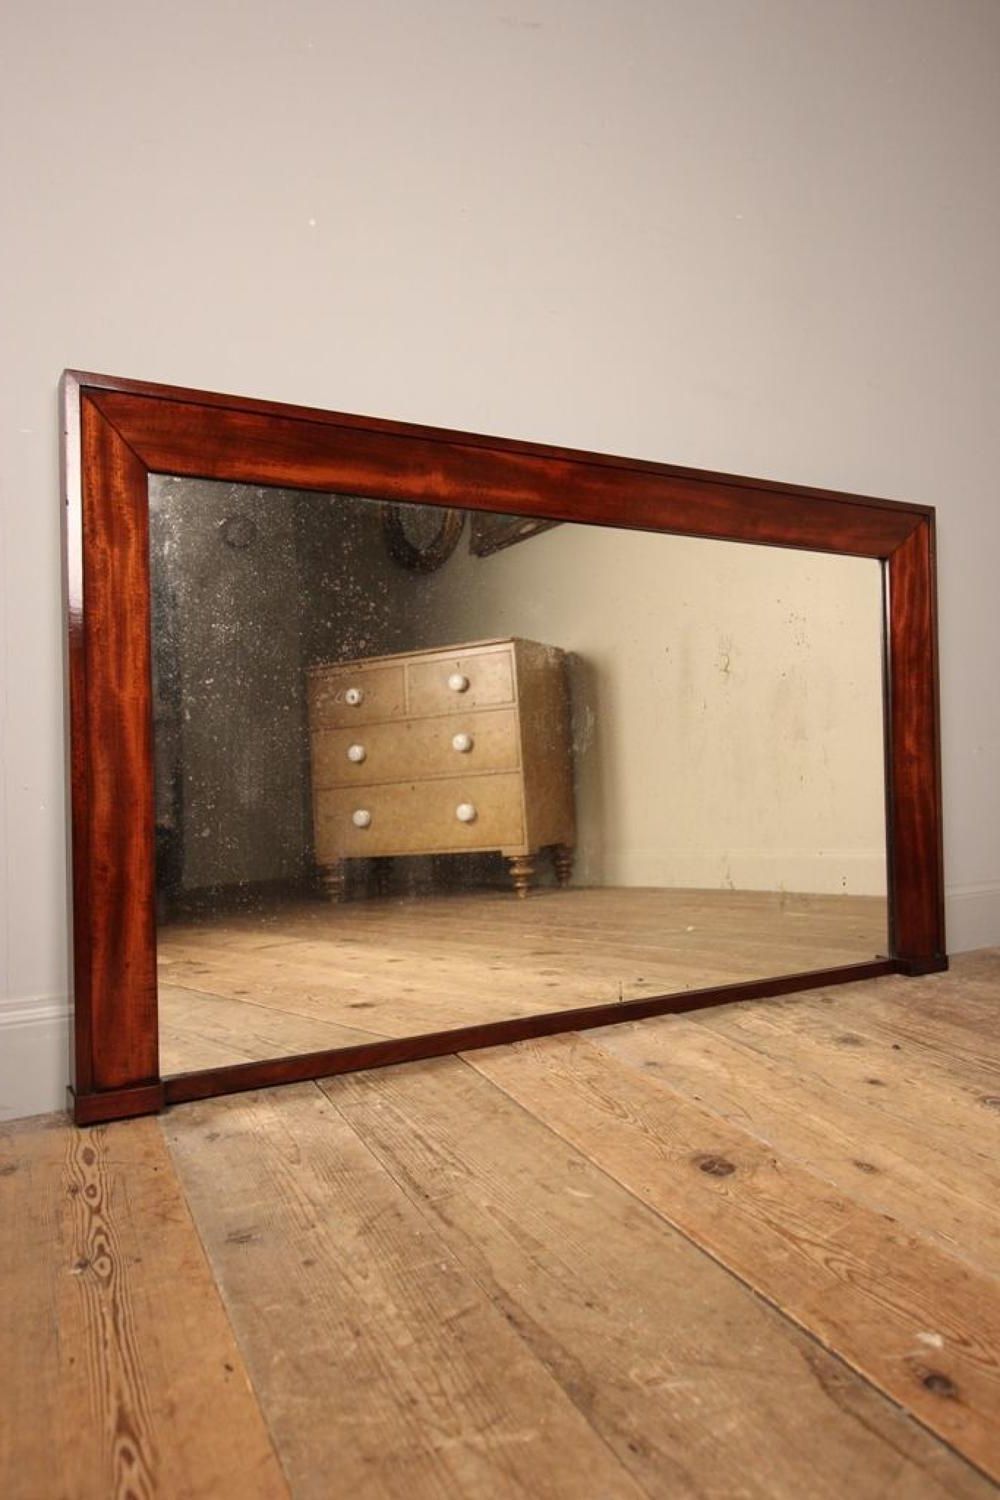 Mahogany Wall Mirrors In Widely Used William Iv Mahogany Wall Mirror In Mirrors & Pictures (View 17 of 20)